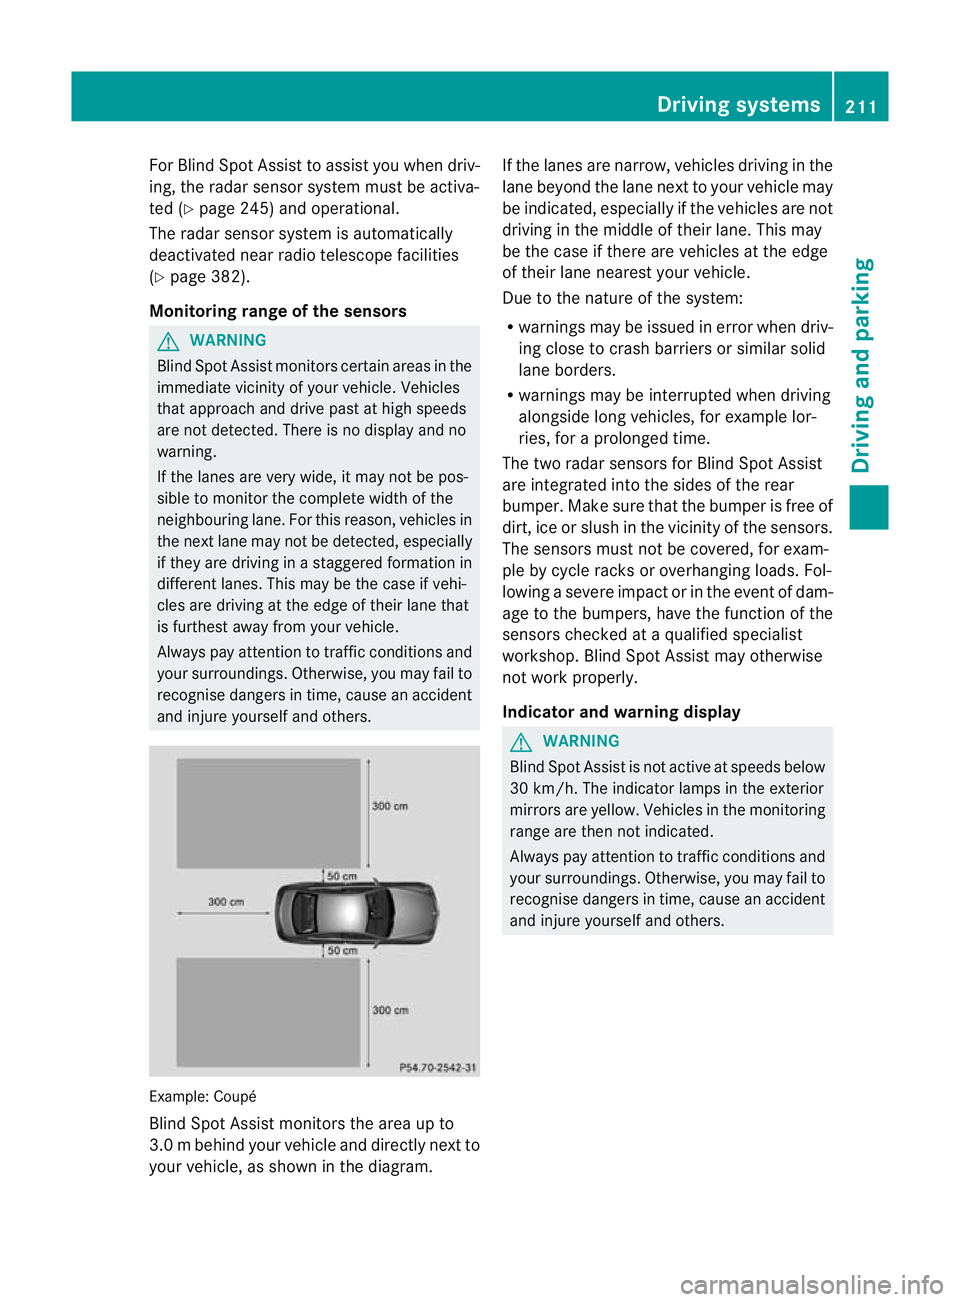 MERCEDES-BENZ E-CLASS CABRIOLET 2012  Owners Manual For Blind Spot Assist to assist you whe
ndriv-
ing, the rada rsensor system must be activa-
ted (Y page 245) and operational.
The radar sensor system is automatically
deactivated near radio telescope 